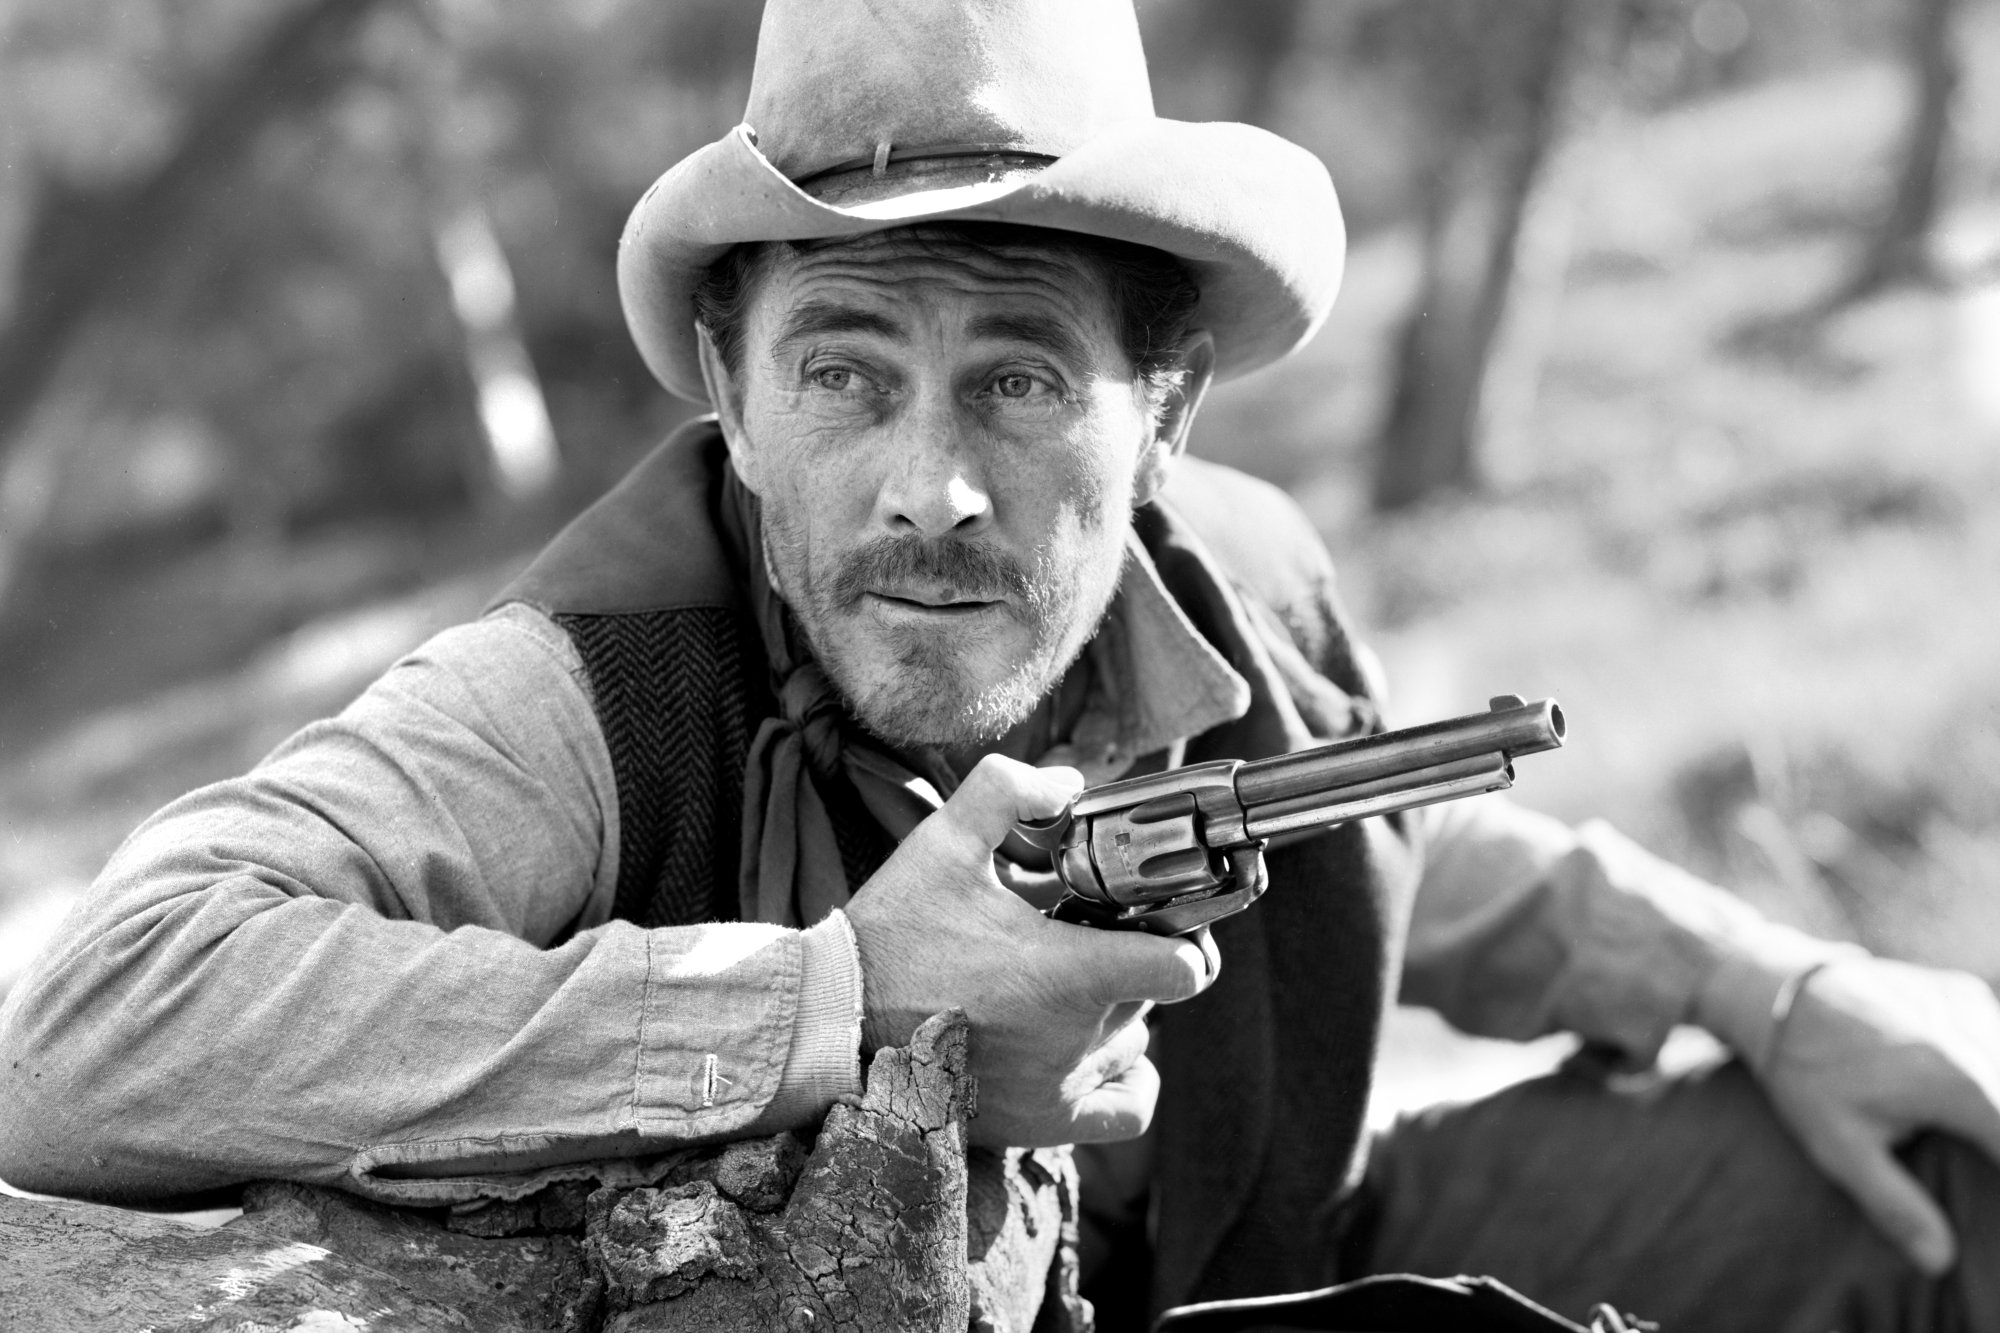 'Gunsmoke' Ken Curtis as Festus Haggen in a black-and-white photograph holding a pistol and wearing a Western outfit.